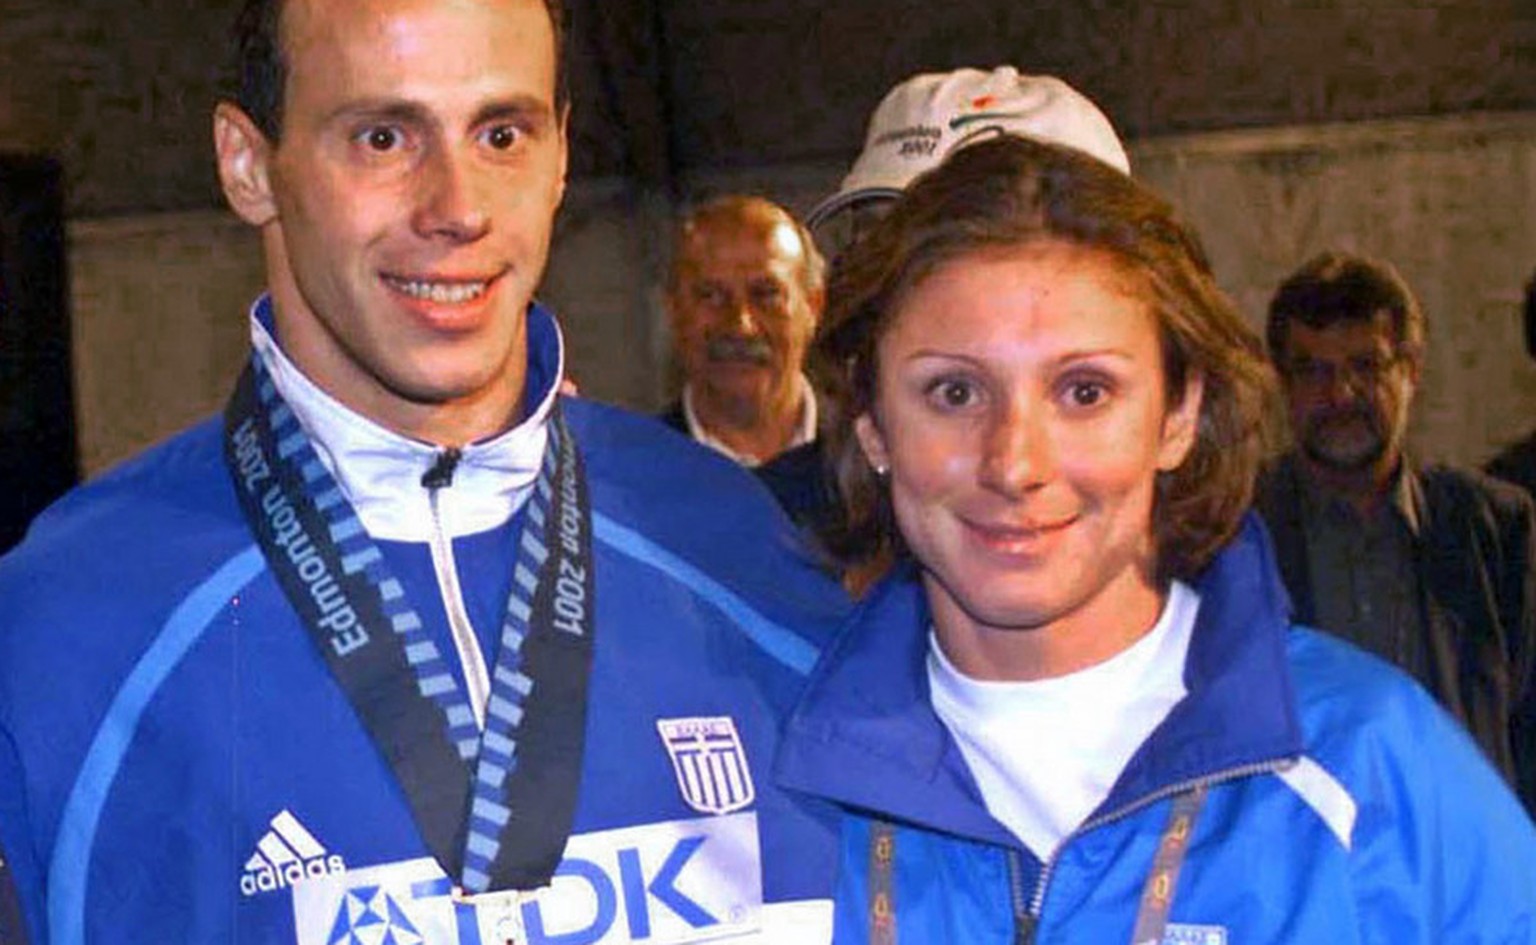 This is an August 9, 2001 photo of Greek athletes Konstantinos Kenteris, center, and Katerina Thanou, the 100-meter silver medalist in Sydney, right with their coach Christos Tsekos taken at the World ...